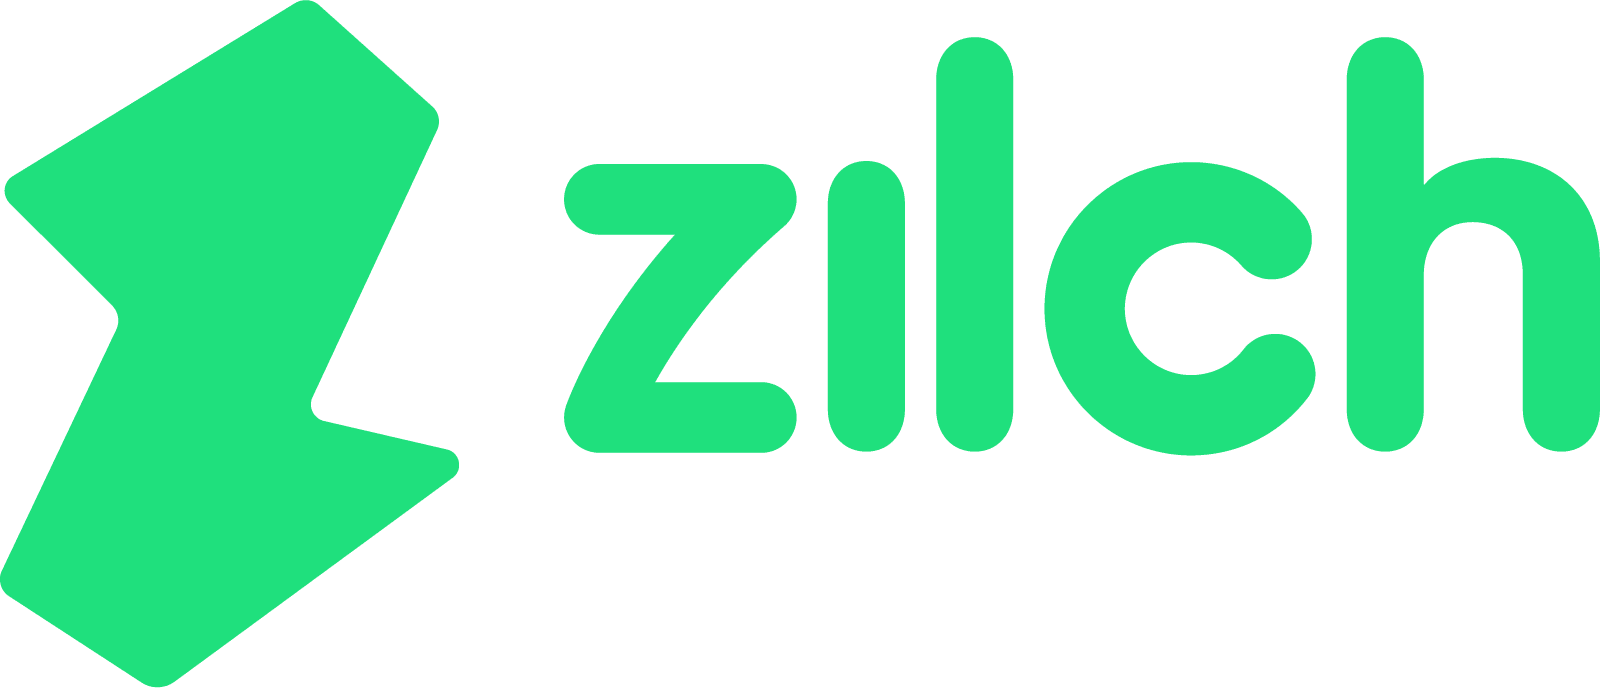 Logo for Zilch has a stylized Z and the word zilch in bright green color